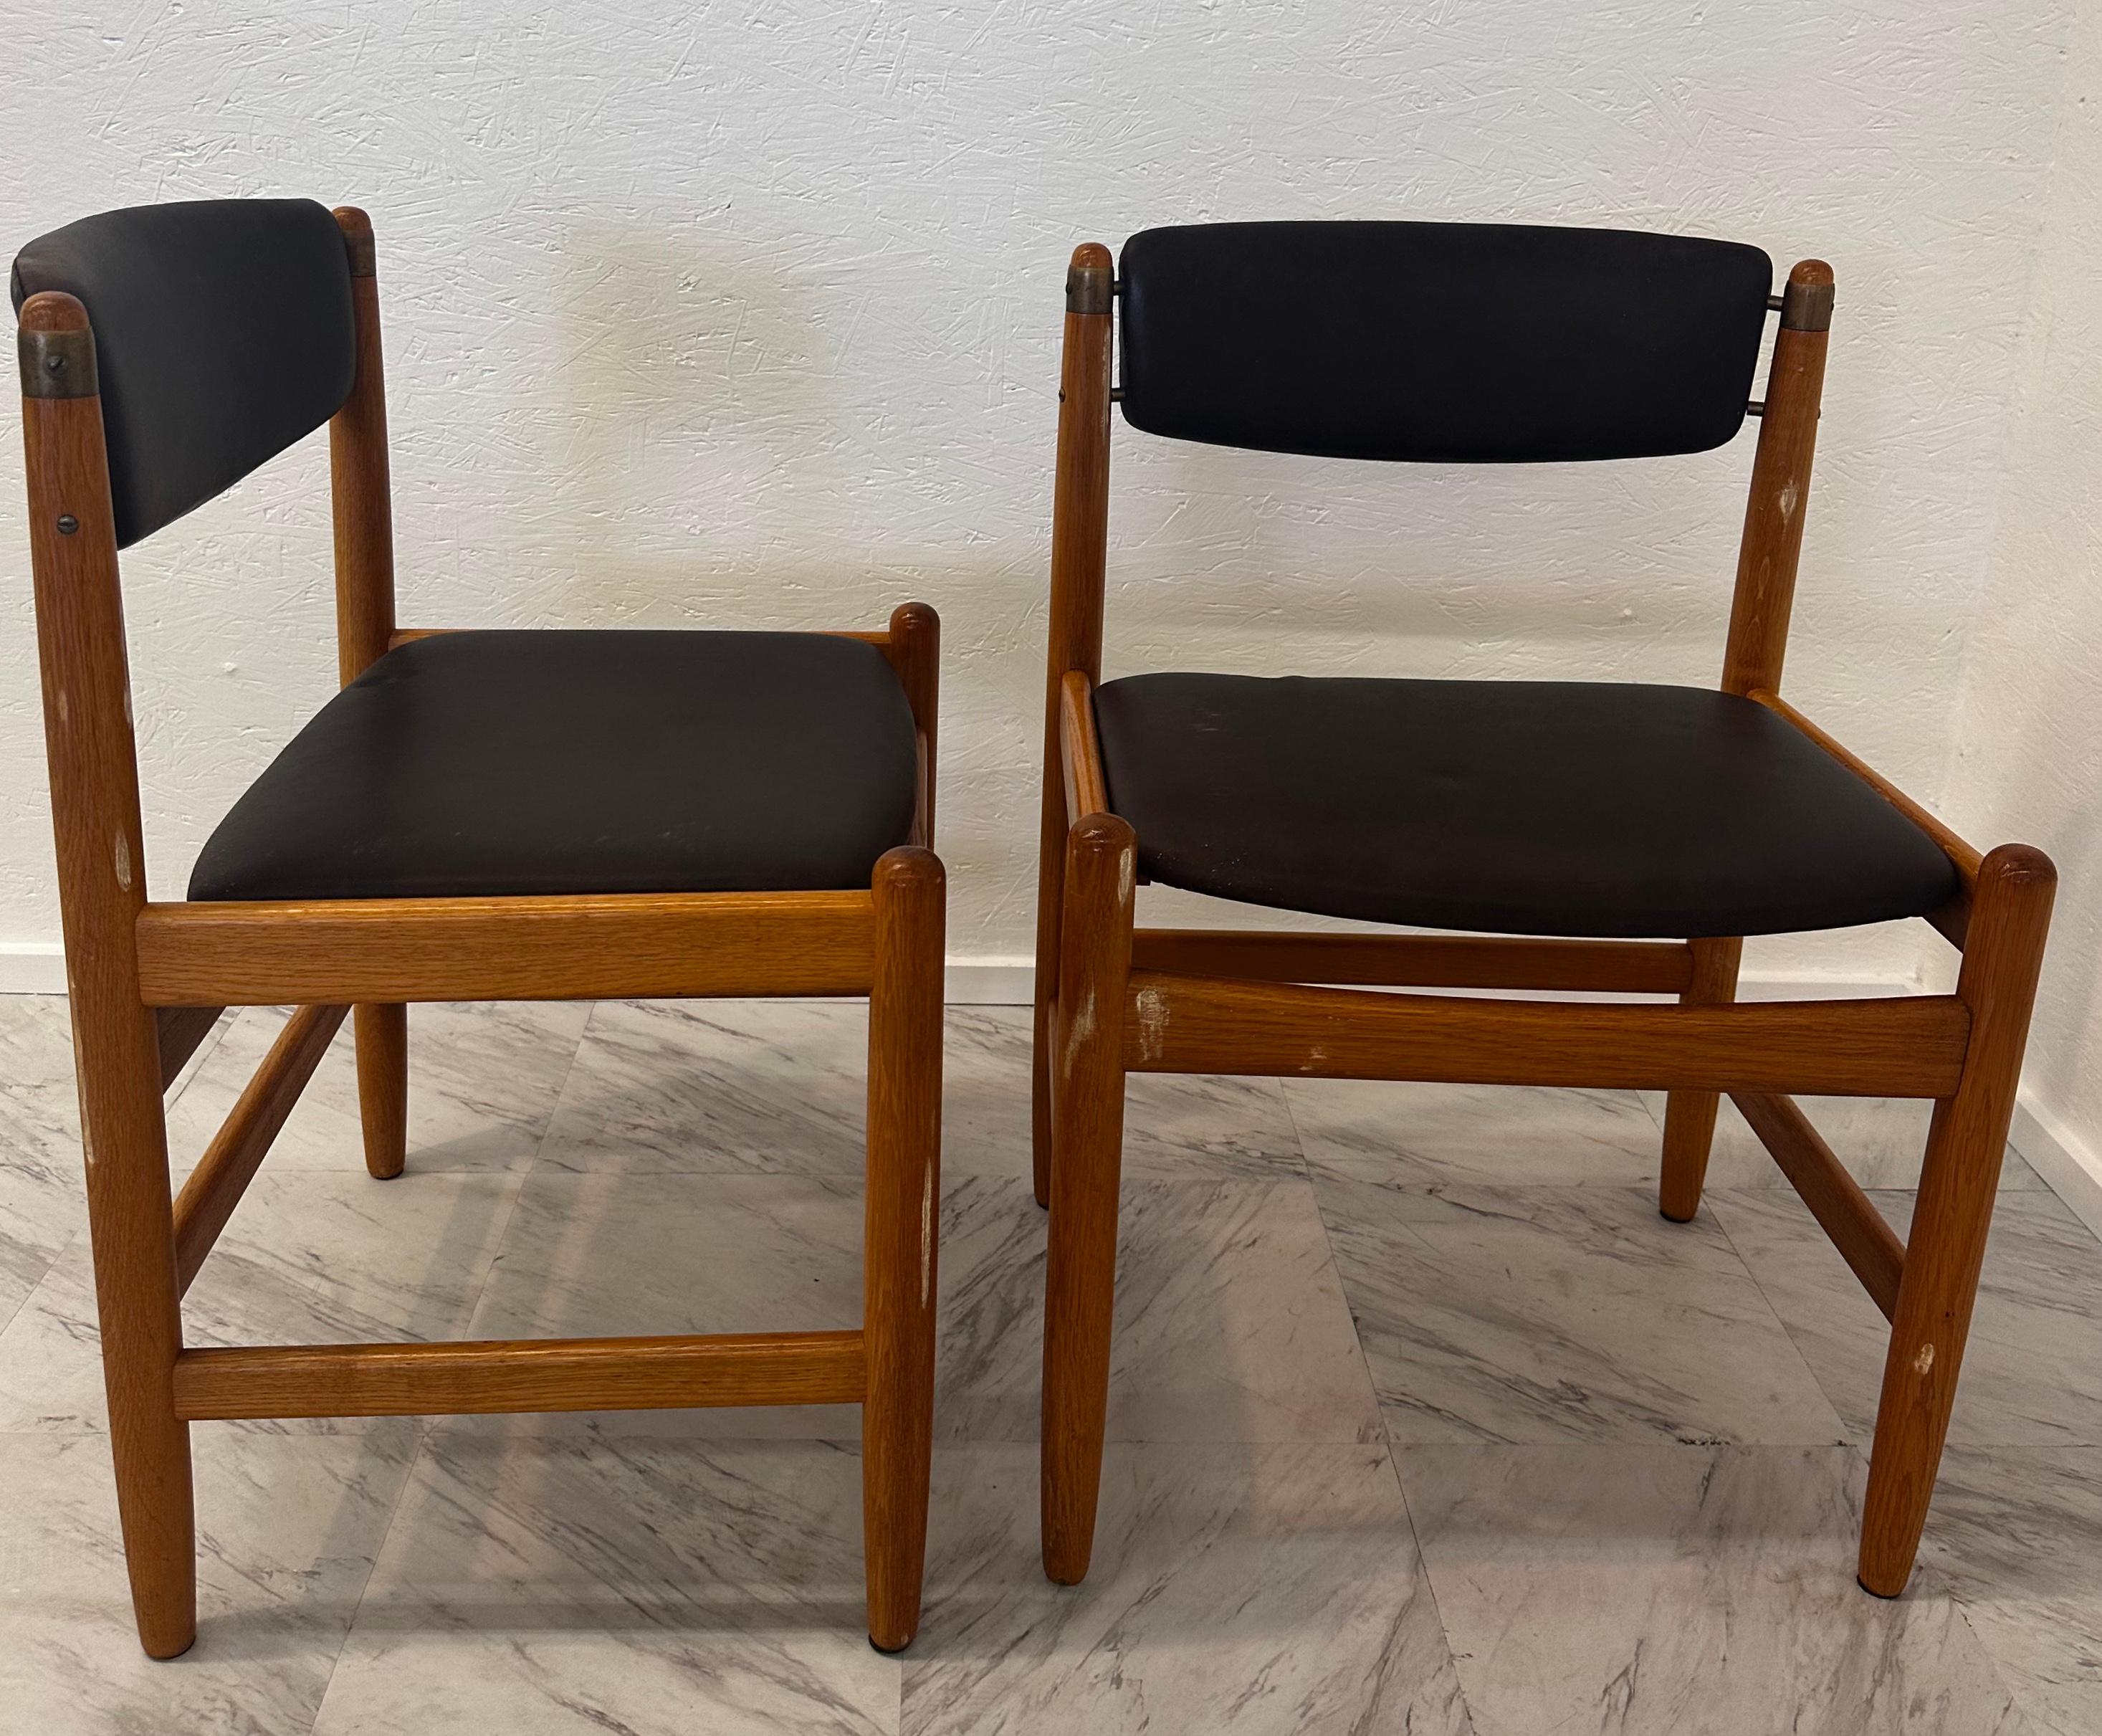 Set of 6 Oak Dining Chairs by Børge Mogensen for Karl Andersson & Söner, 1950s For Sale 1